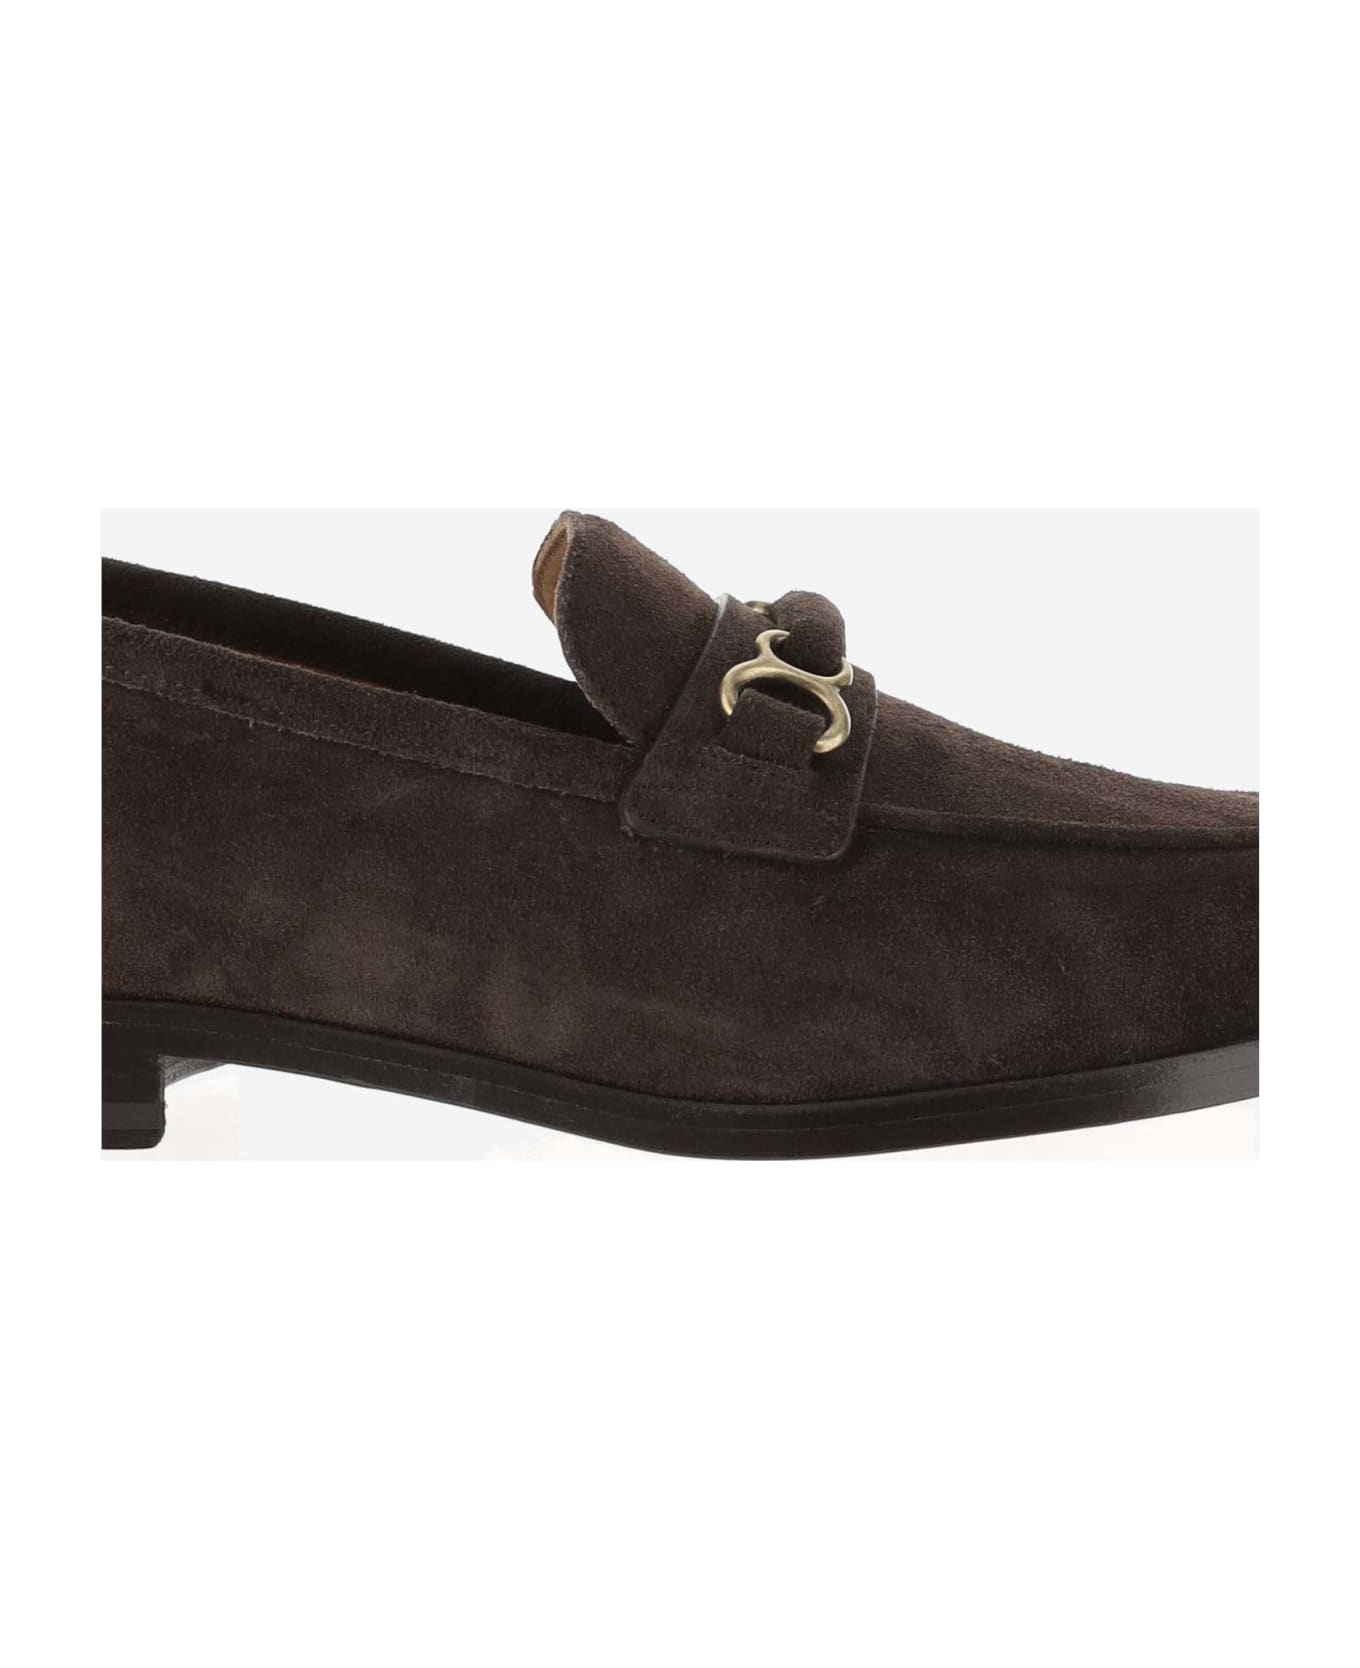 Sartore Suede Loafers - Brown フラットシューズ